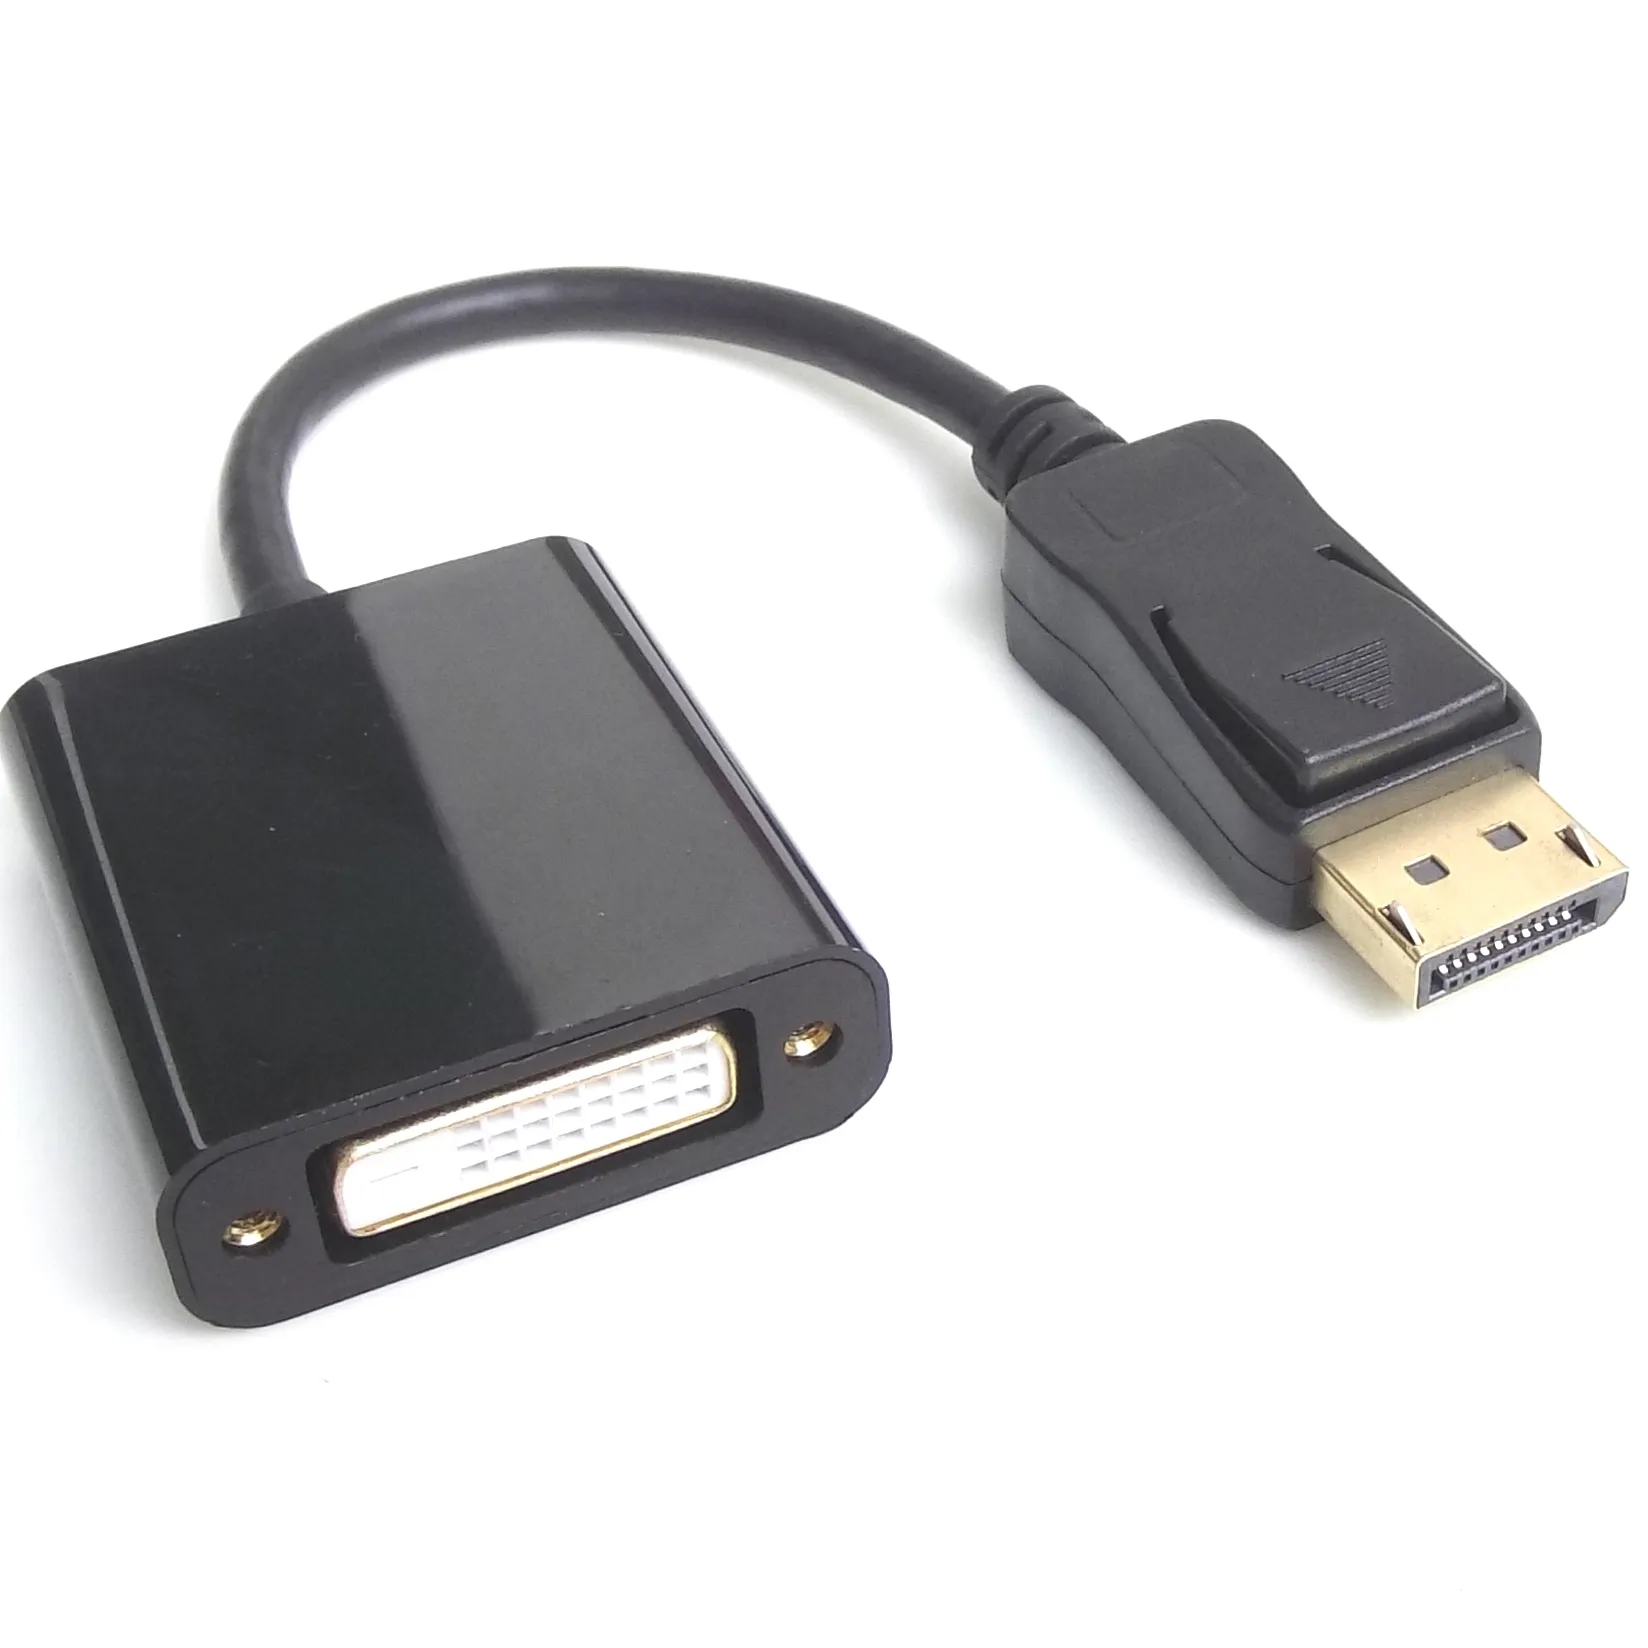 25cm Displayport DP Male to DVI Female Adapter Video Display Port Cable Converter for PC Laptop Black